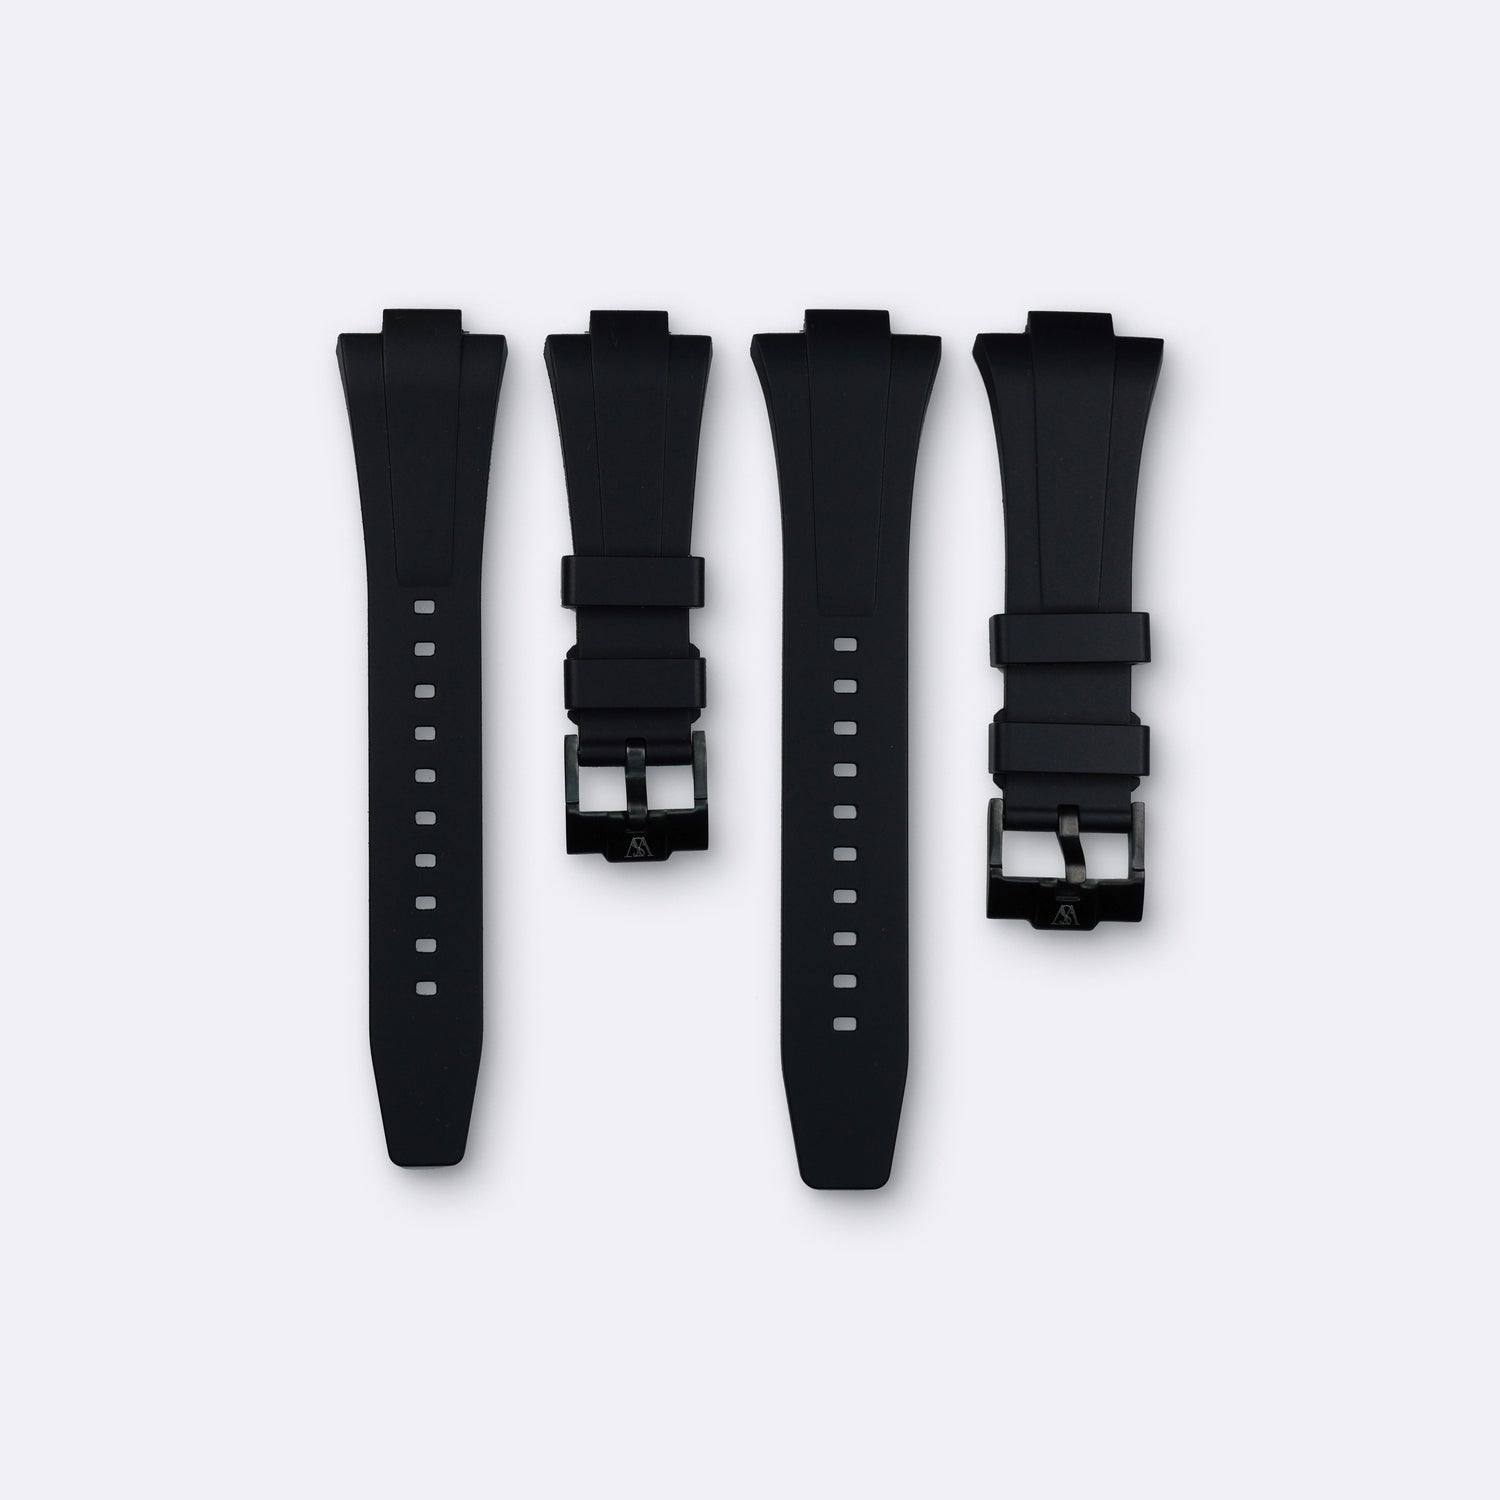 Rubber for Prx | Watch Snob